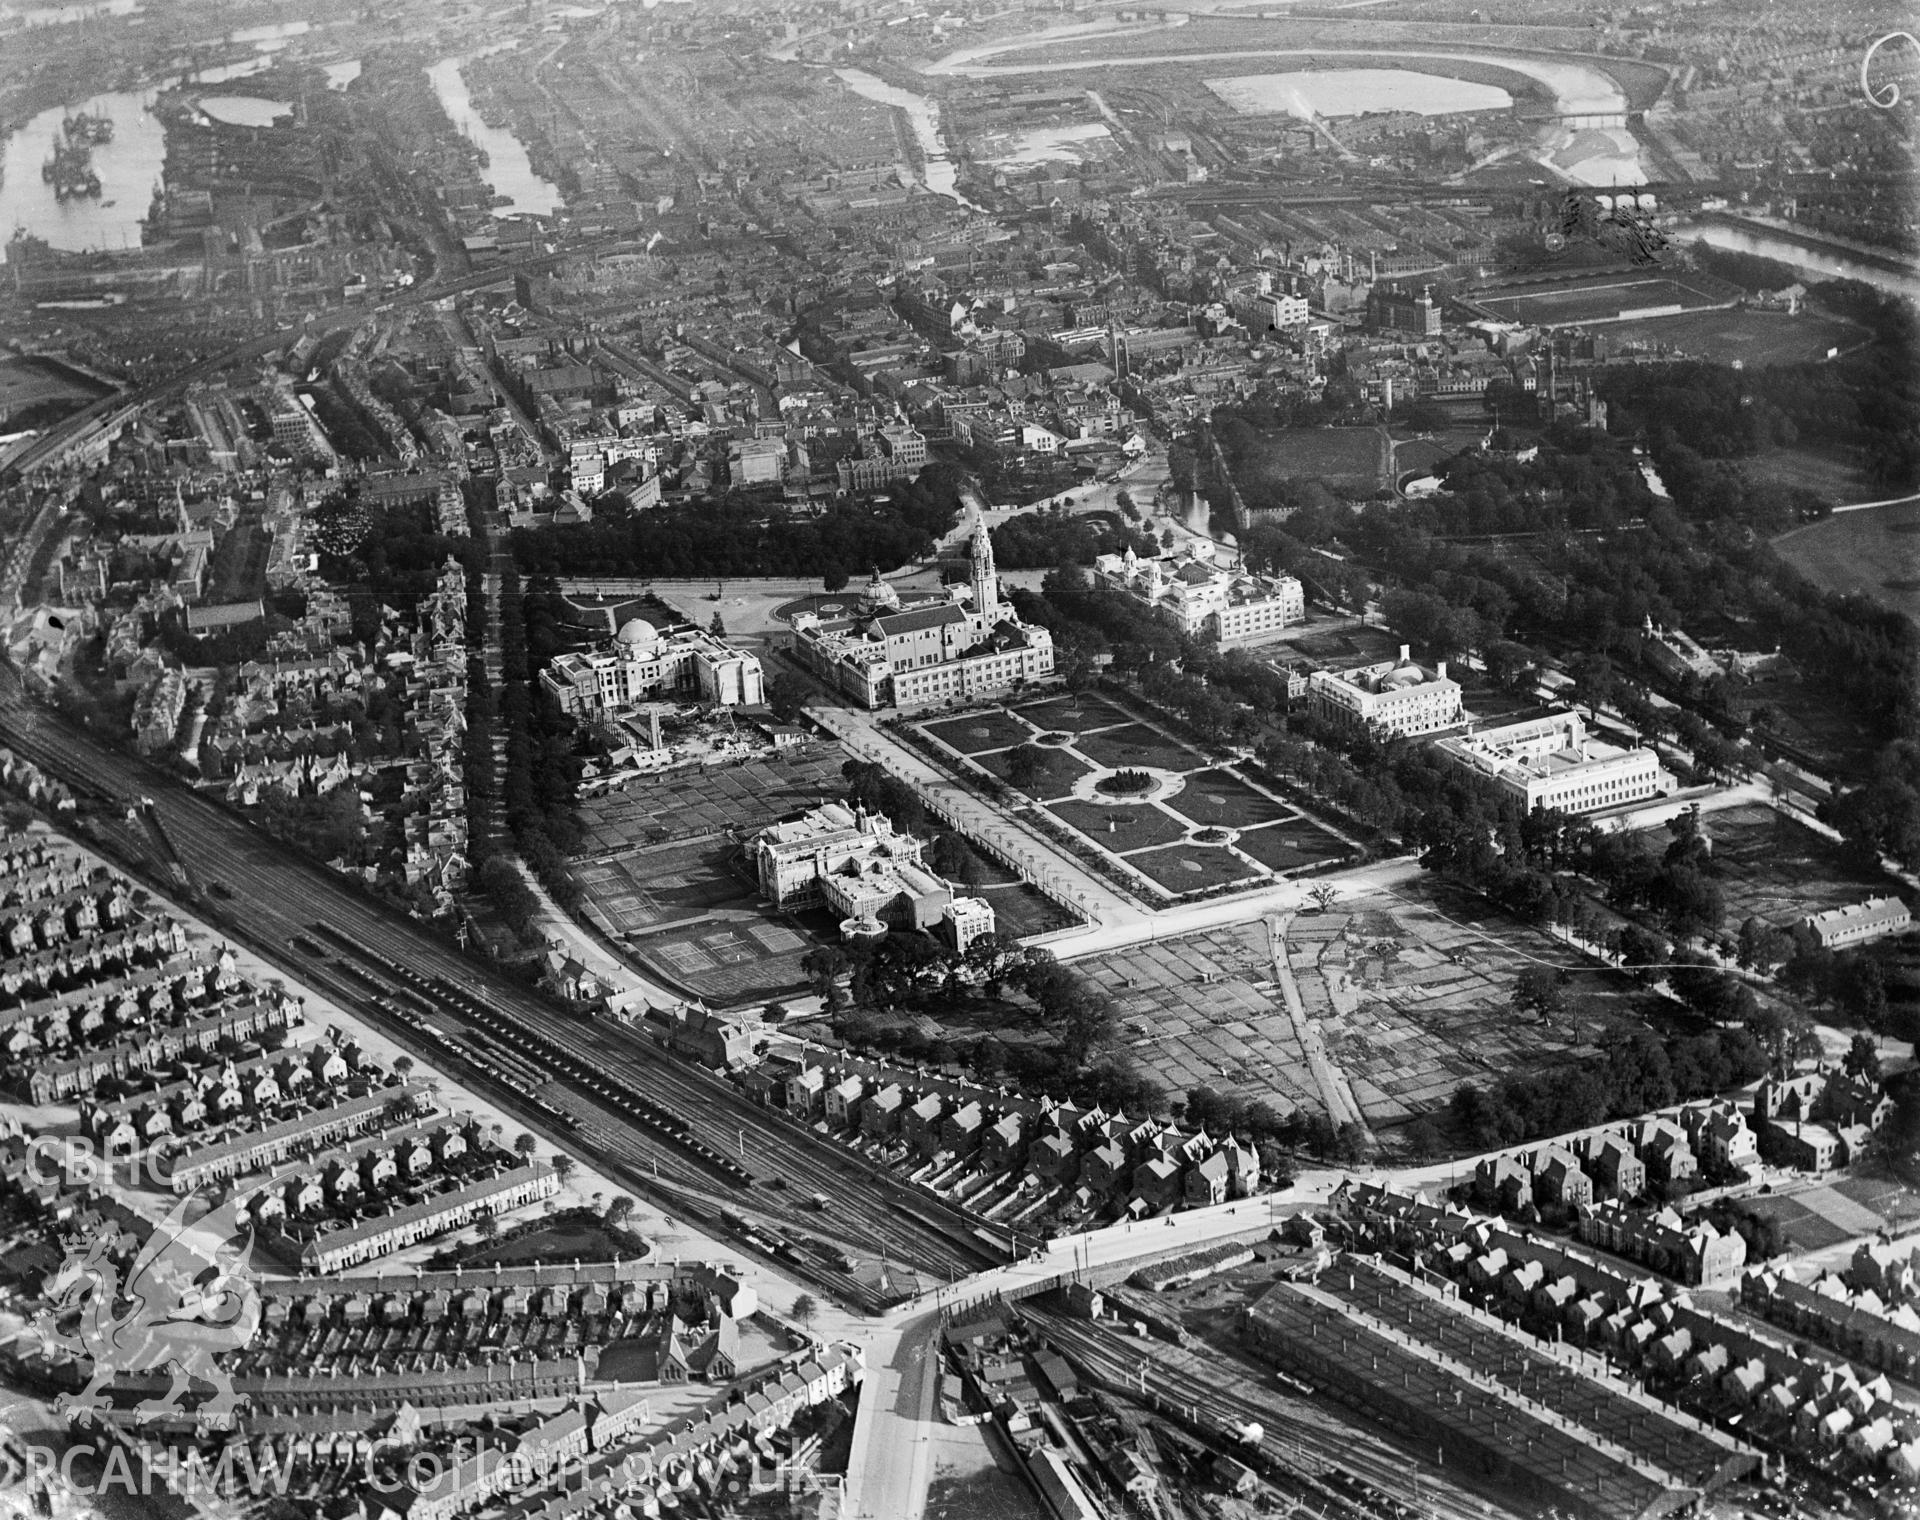 View of Cardiff showing Cathays Park and Civic Centre, oblique aerial view. 5?x4? black and white glass plate negative.